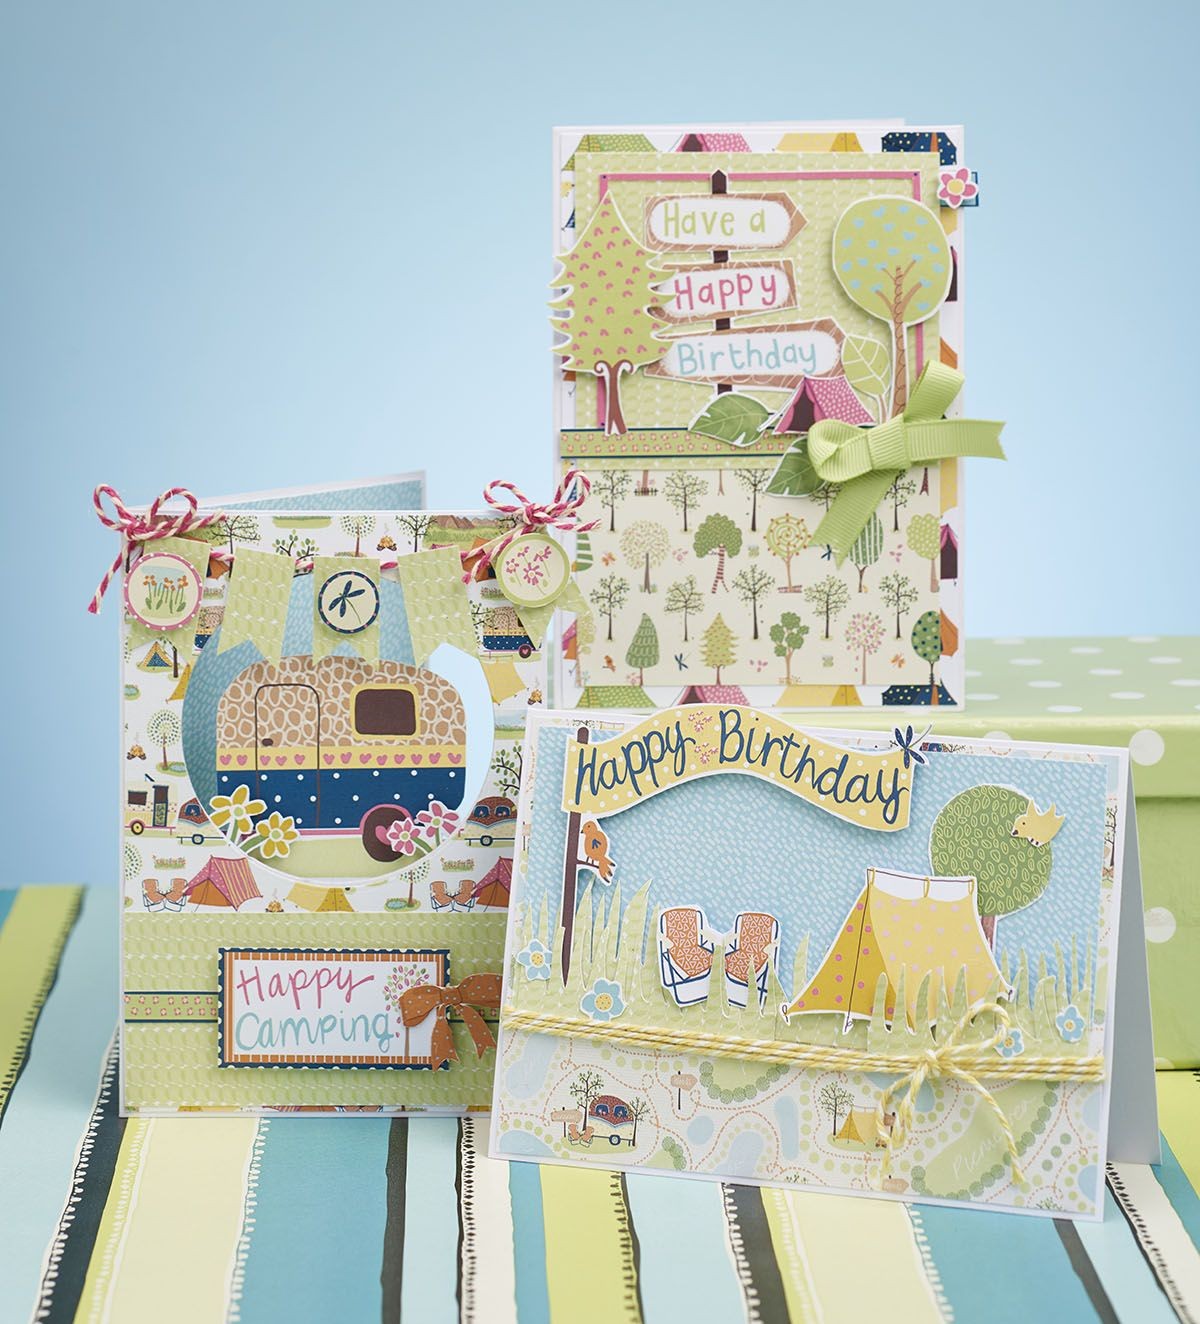 Papercraft Card Pitch Up and Make some Adorable Cards with these Fantastic Cute